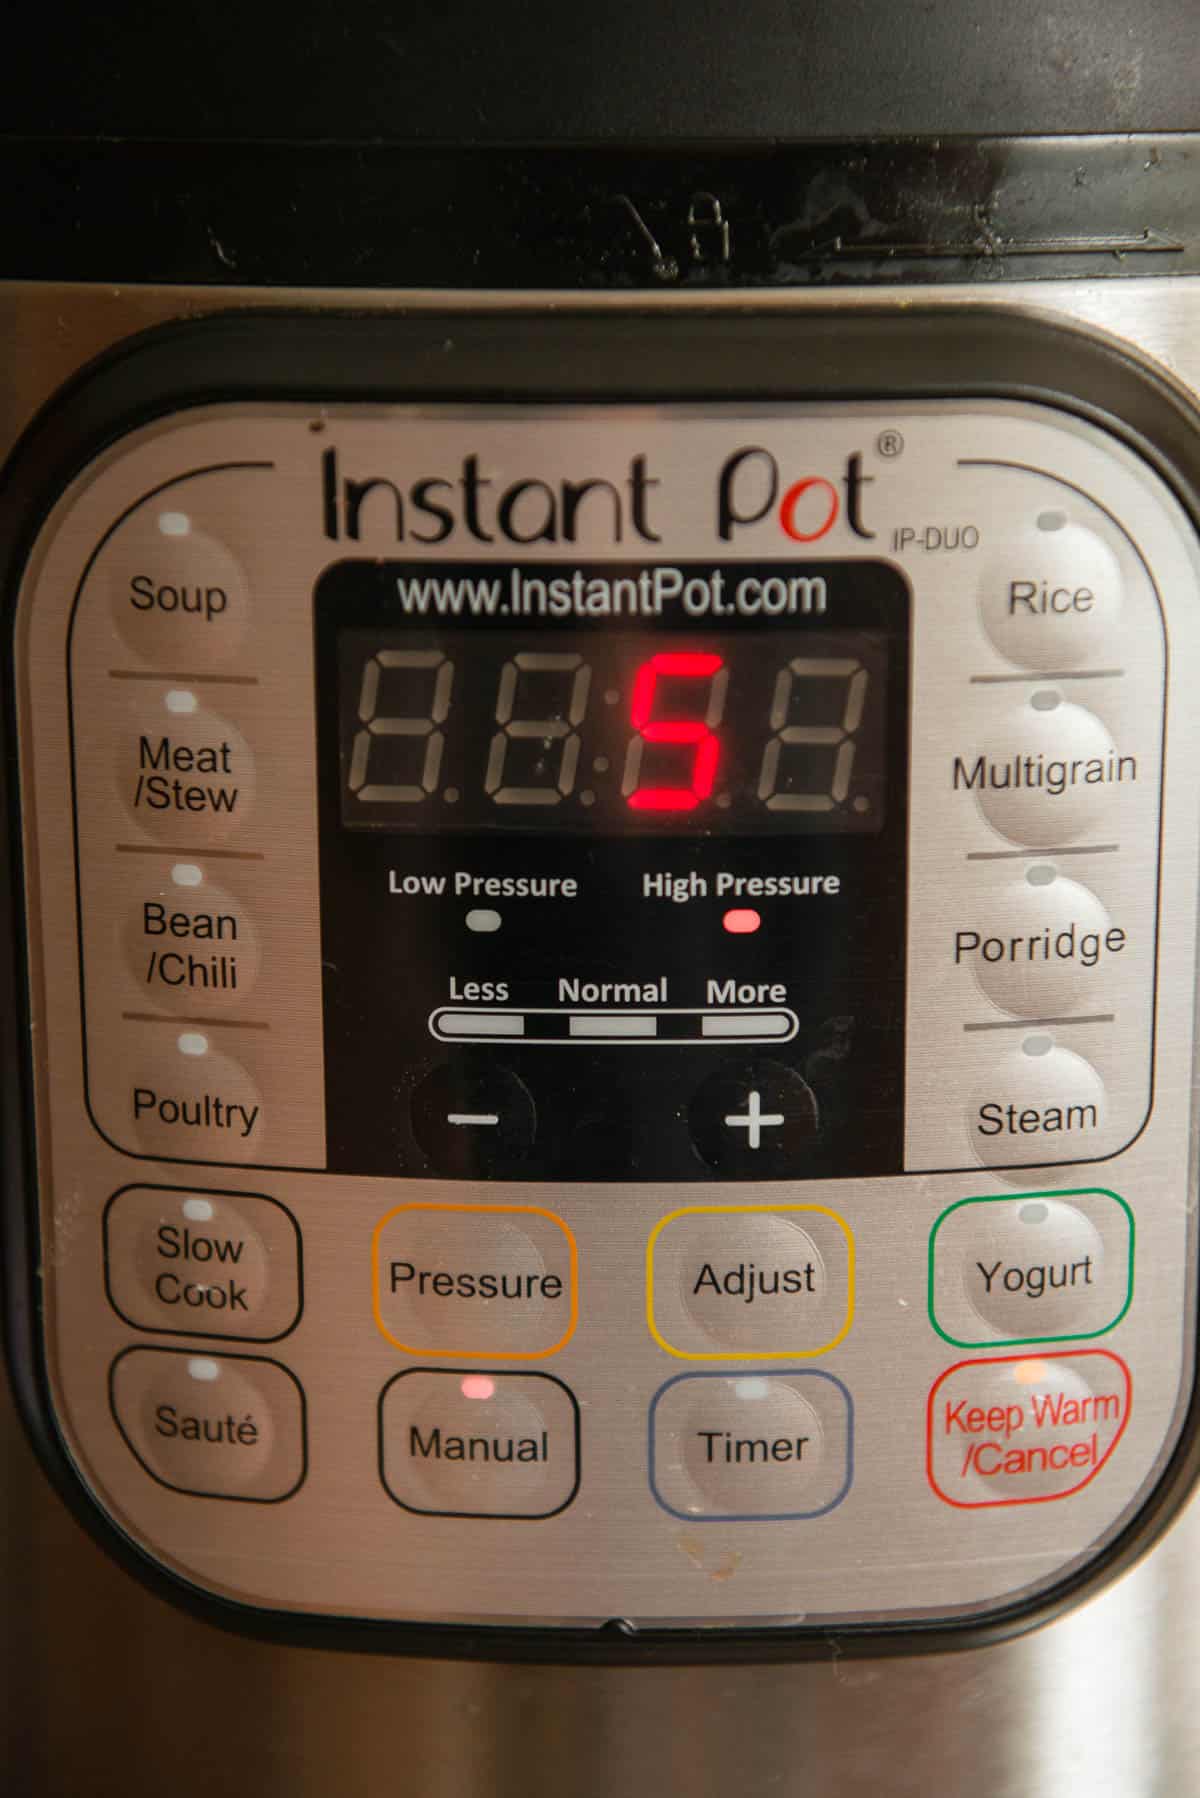 Instant pot with pressure set to 5 minutes.